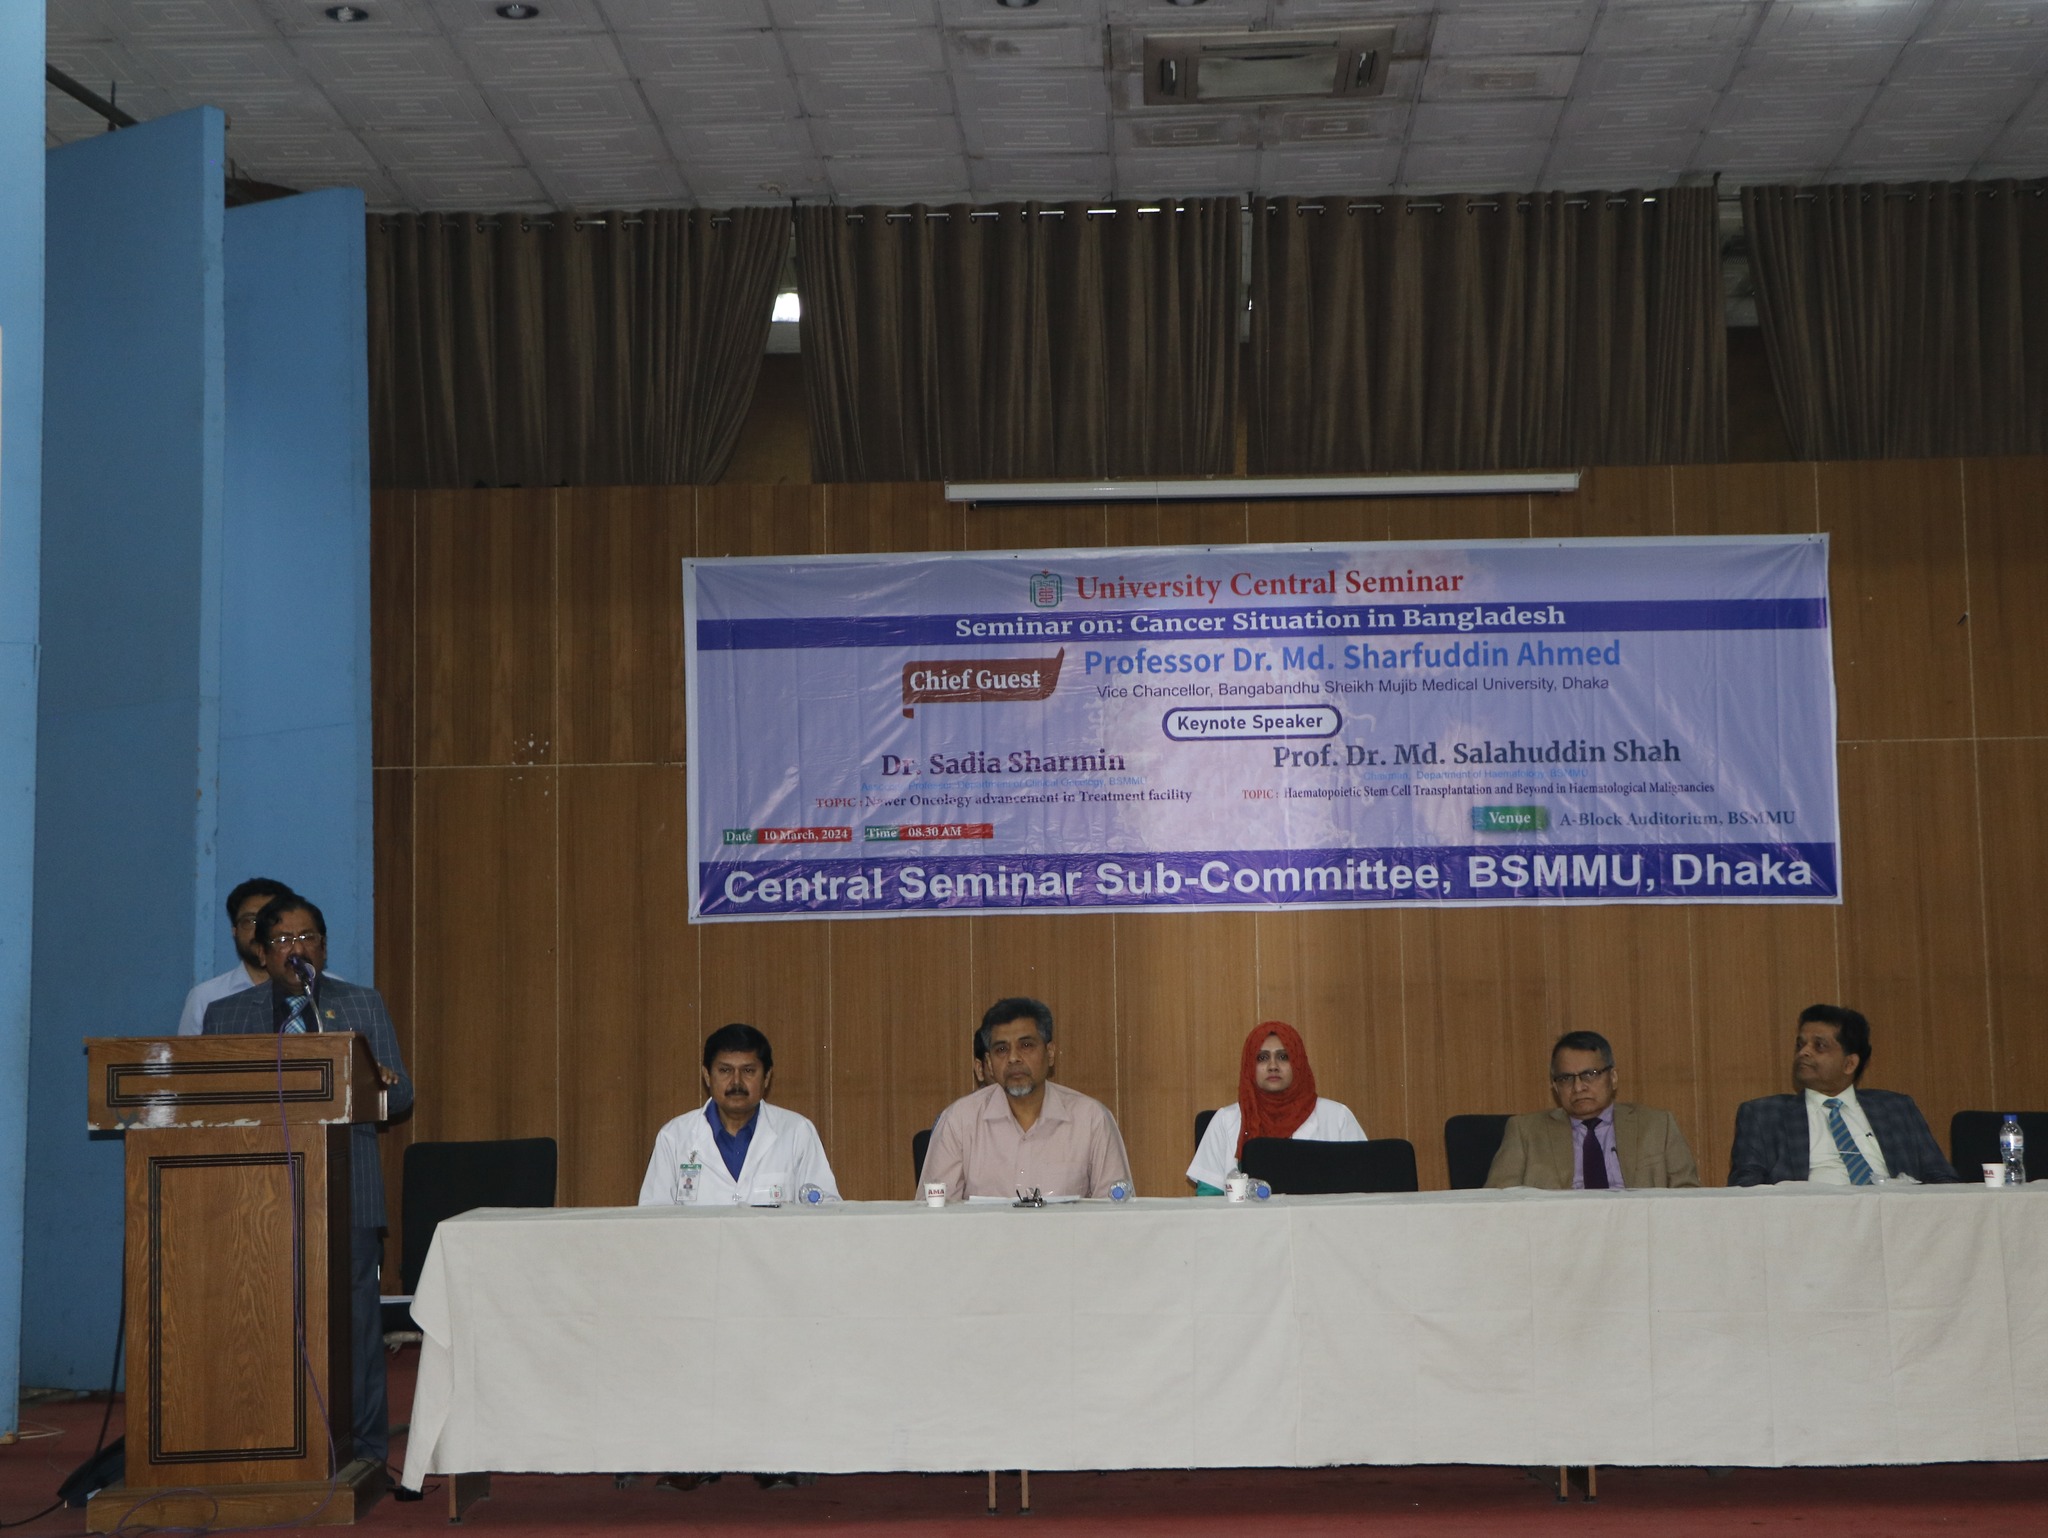 University Center Seminar On: Cancer Situation in Bangladesh held at BSMMU